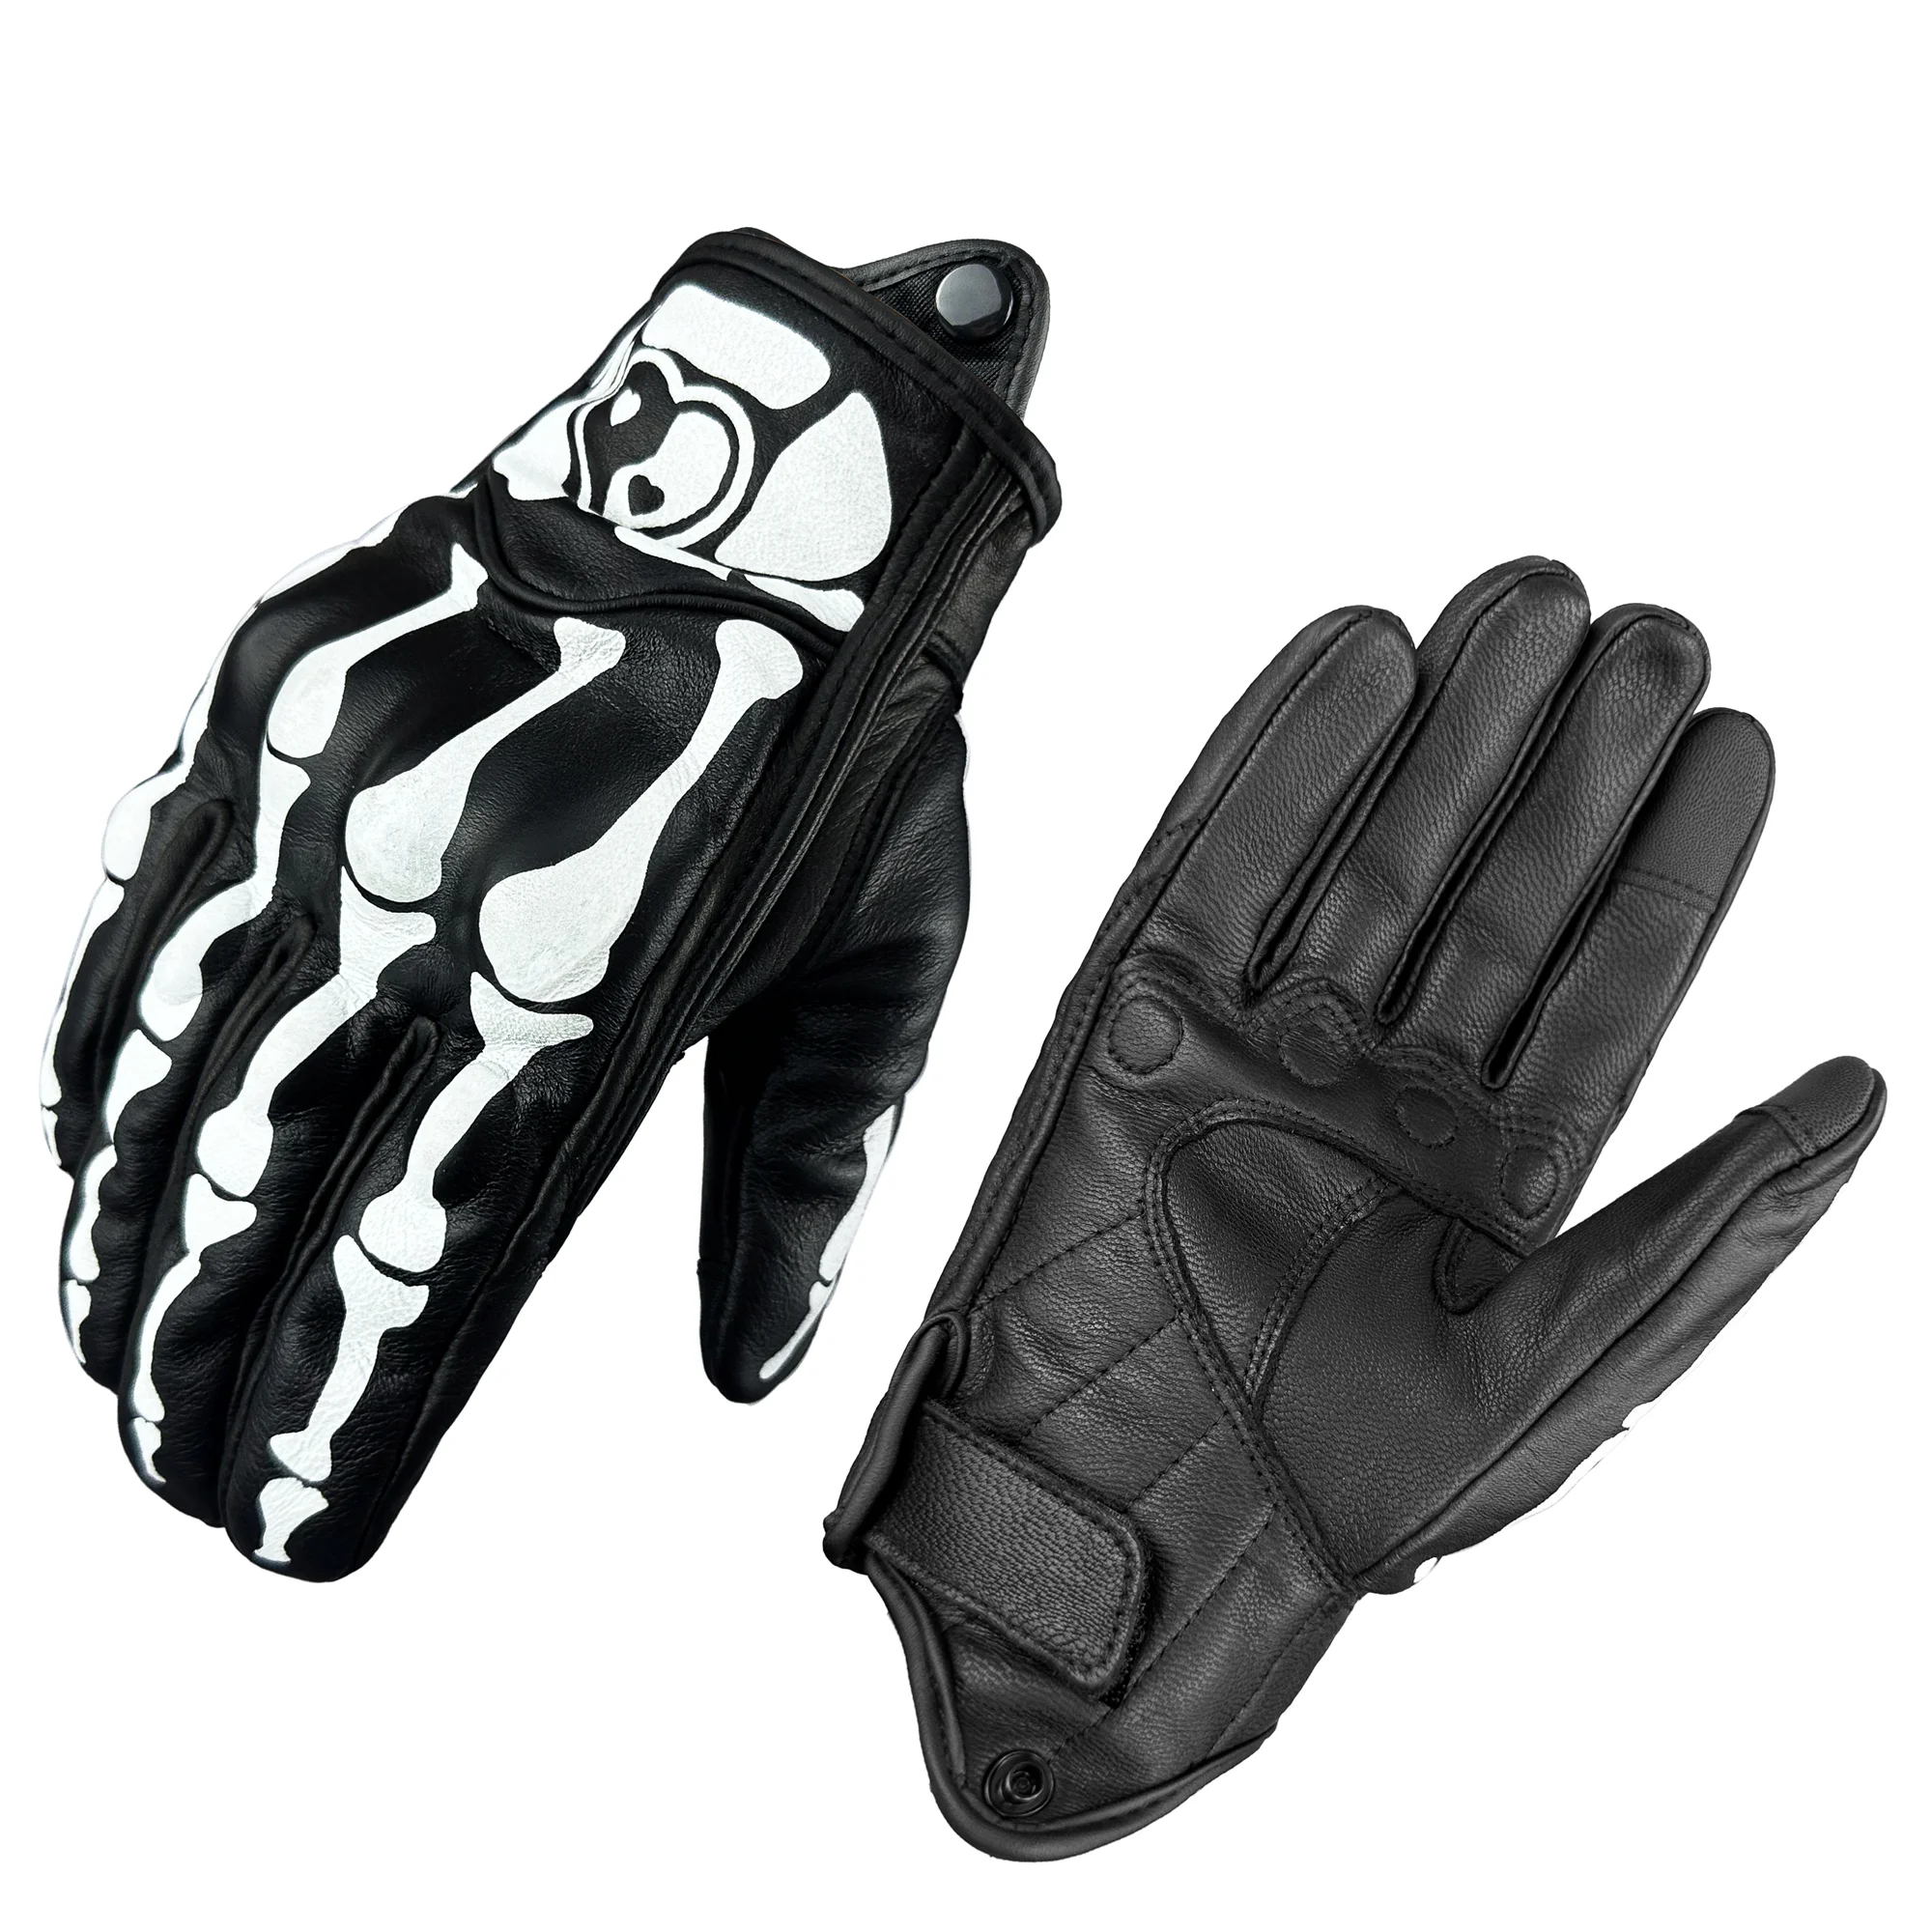 Leather Motorcycle Gloves Motorbike Road Racing Glove Full Finger Cyclin... - $26.61